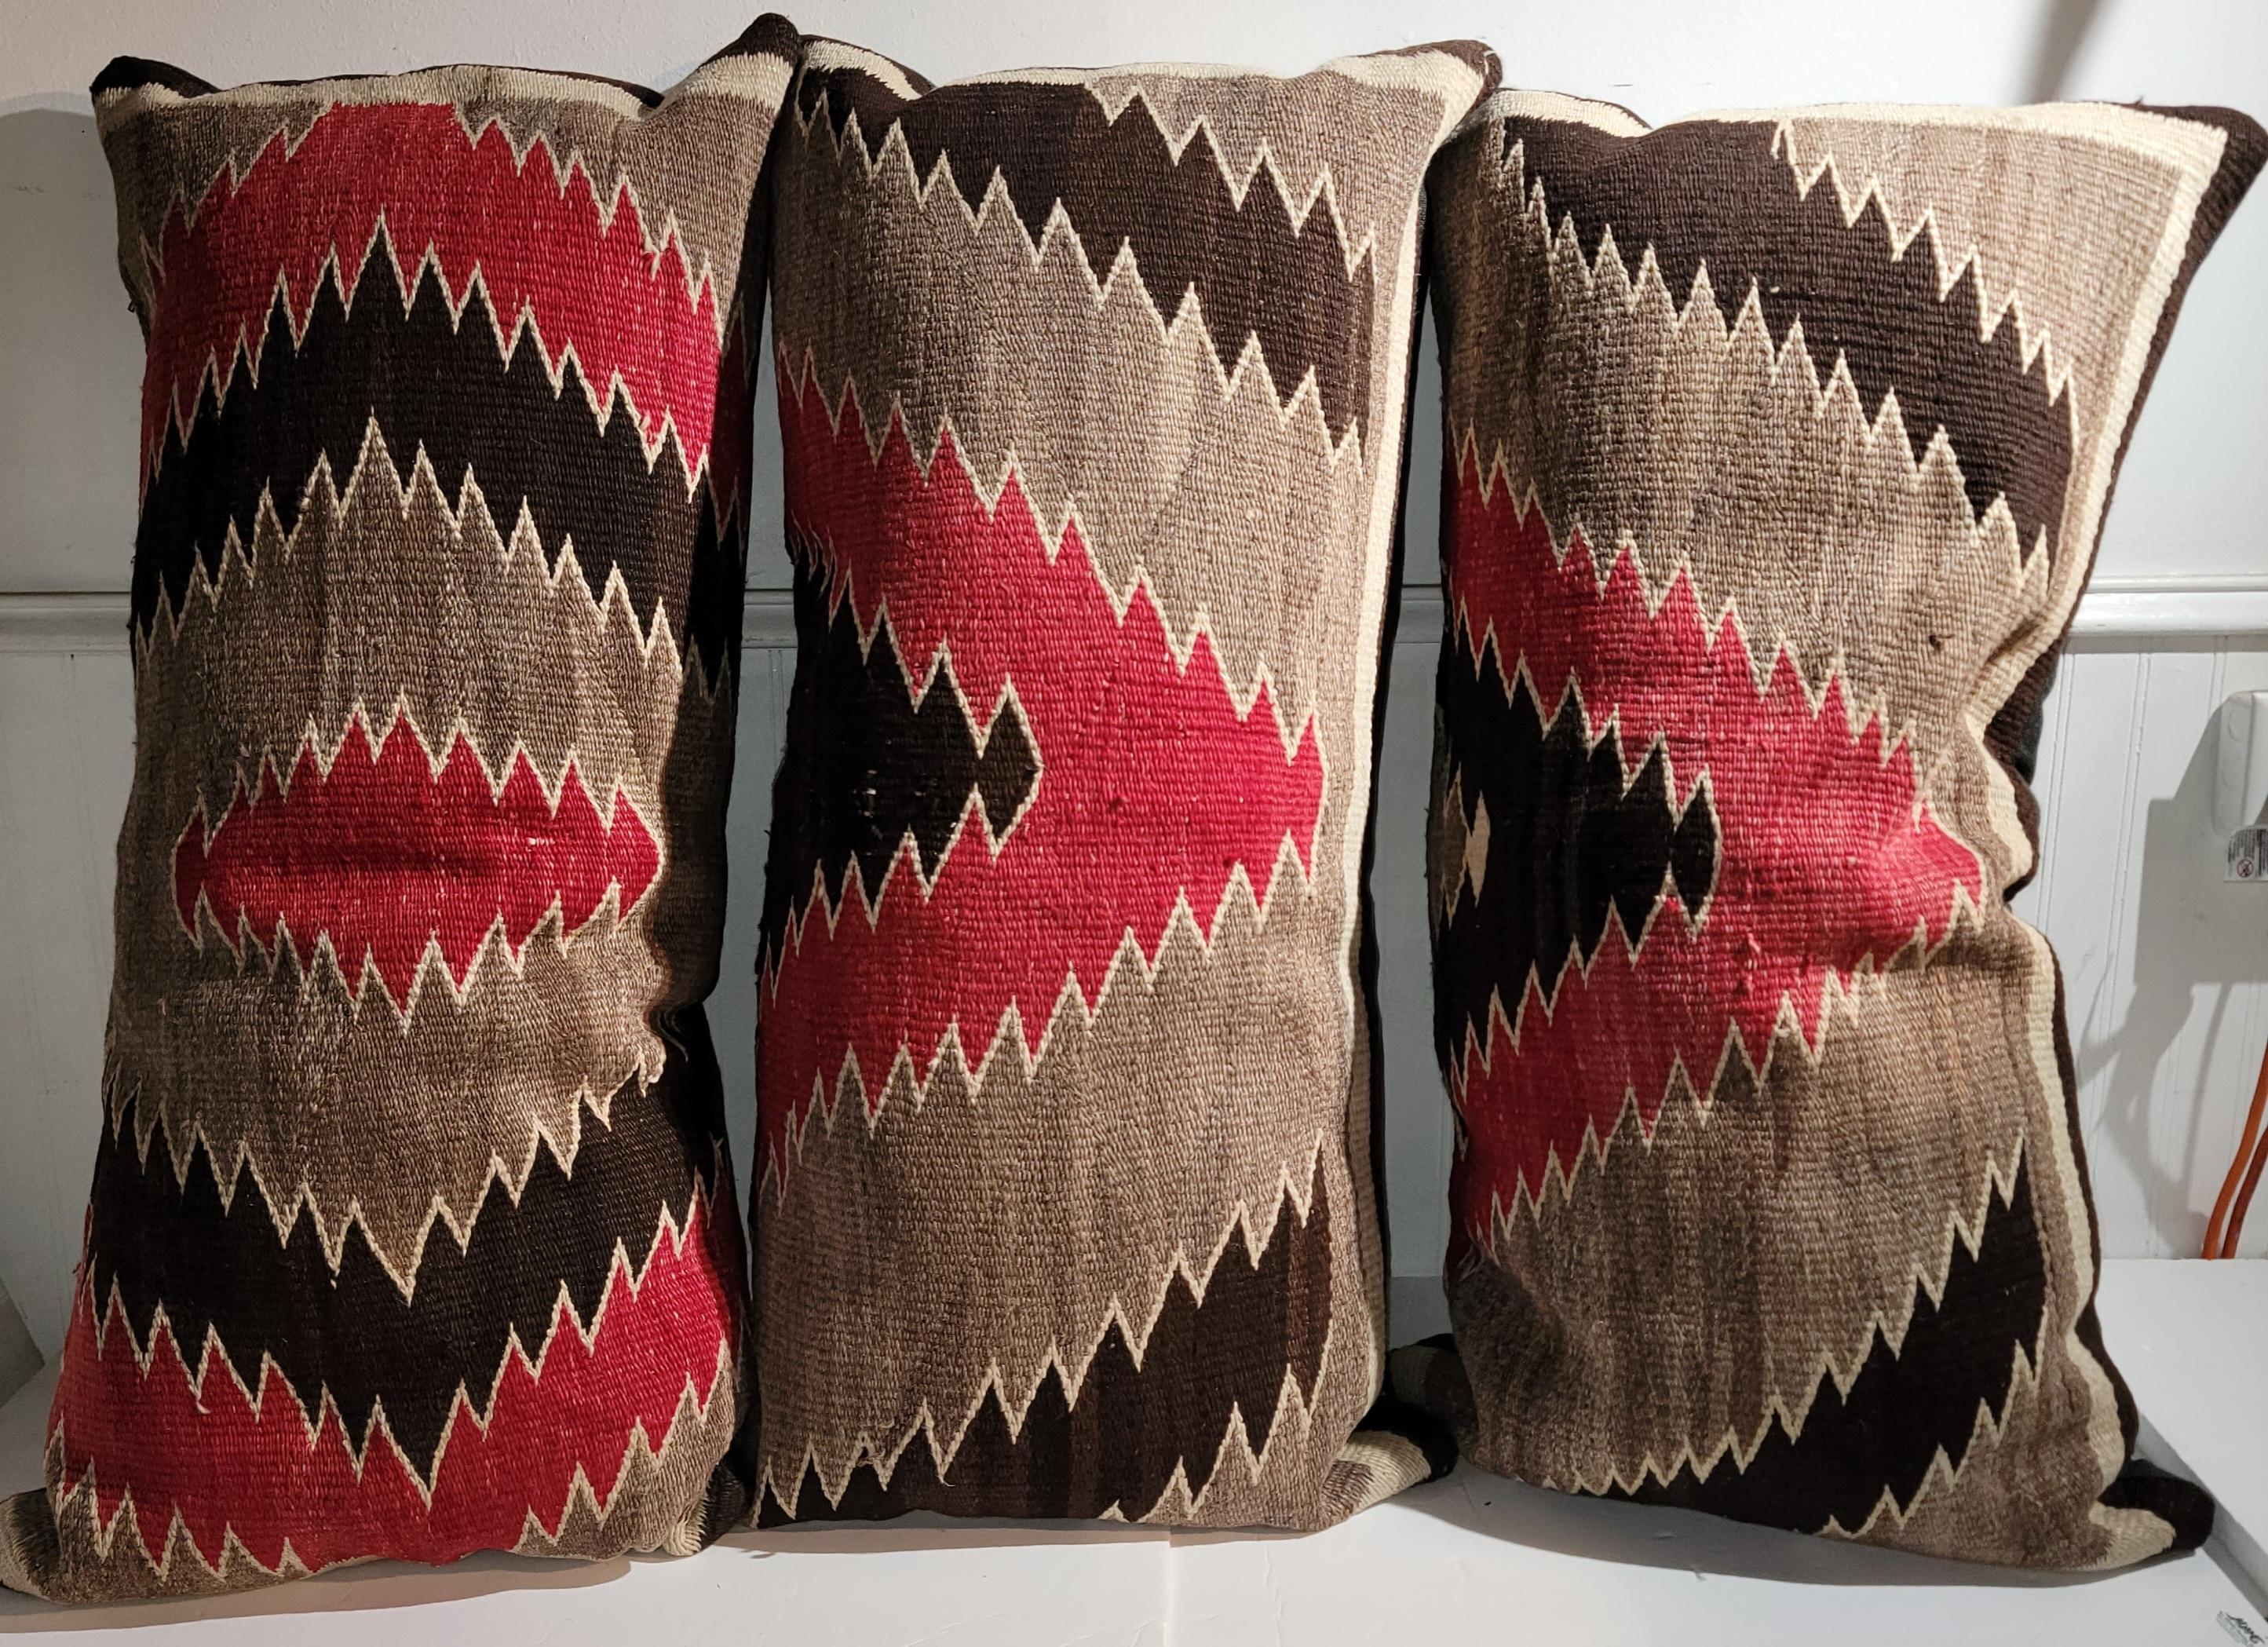 Collection of three Navajo Indian weaving geometric bolster pillows. The backings are in brown cotton linen & down & feather filled.
All three pillows measure the same. Sold as a collection.